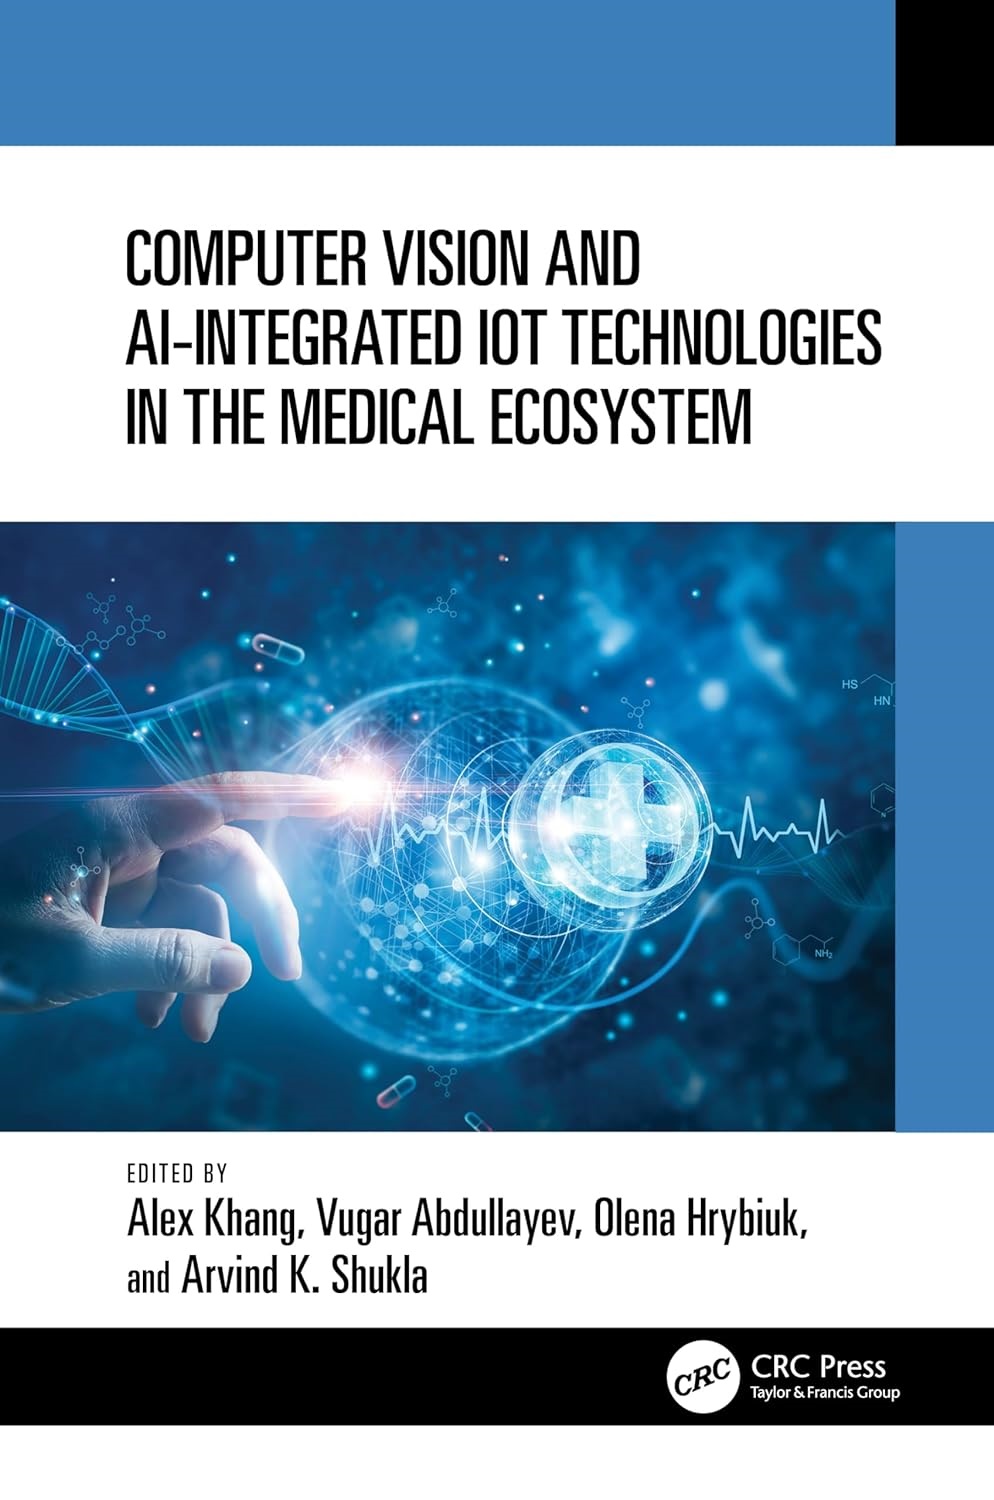 Computer Vision and AI-integrated IoT Technologies in Medical Ecosystem